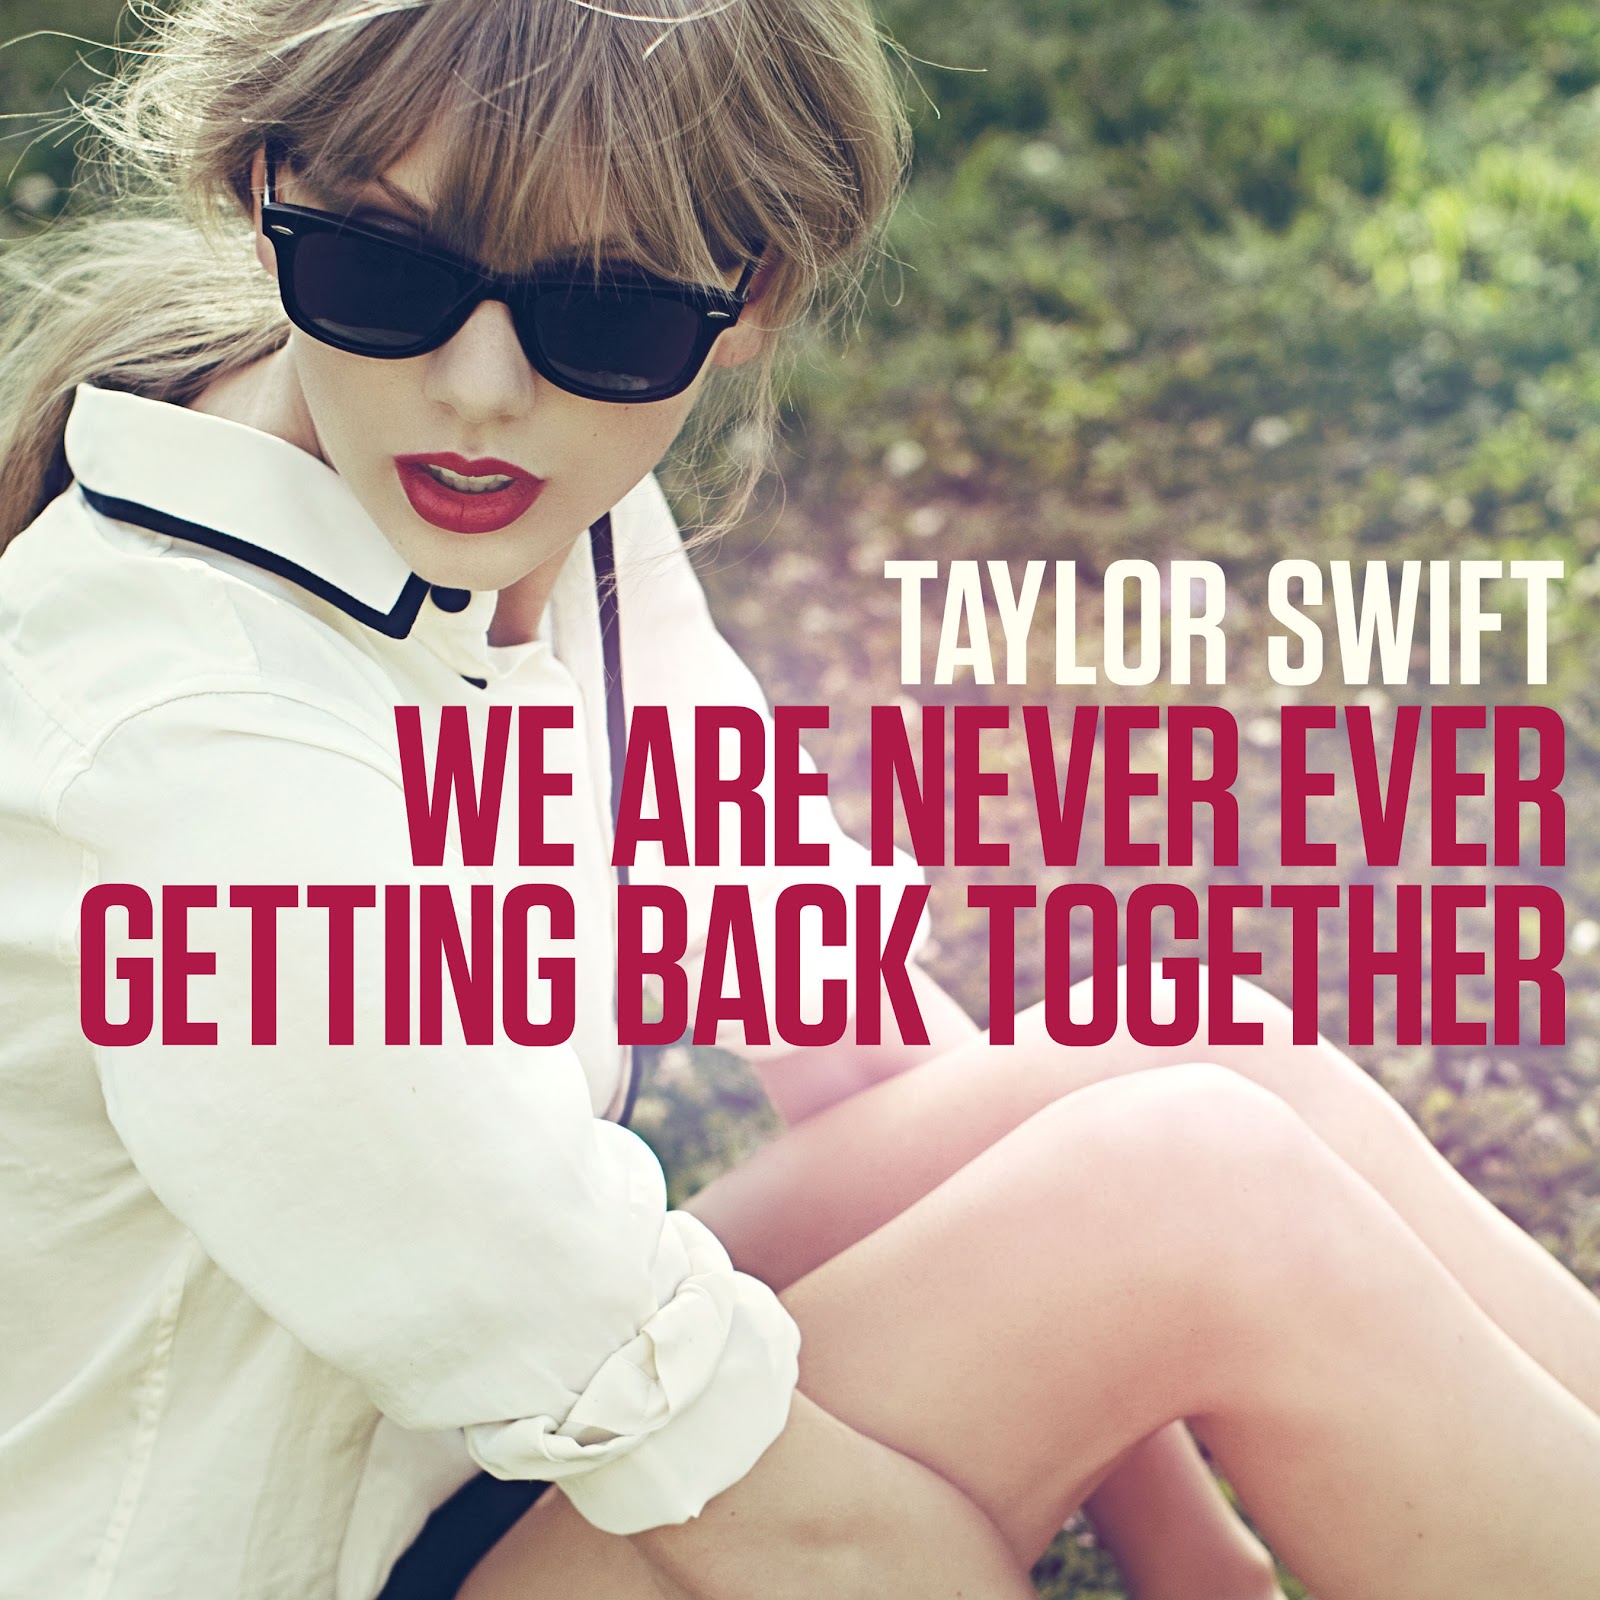 http://3.bp.blogspot.com/-FbBqIobnzFY/UD4Gb3Uv-GI/AAAAAAAAApk/epzNLEUgKKw/s1600/Cover-art-for-Taylor-Swift-single-We-Are-Never-Ever-Getting-Back-Together.jpg